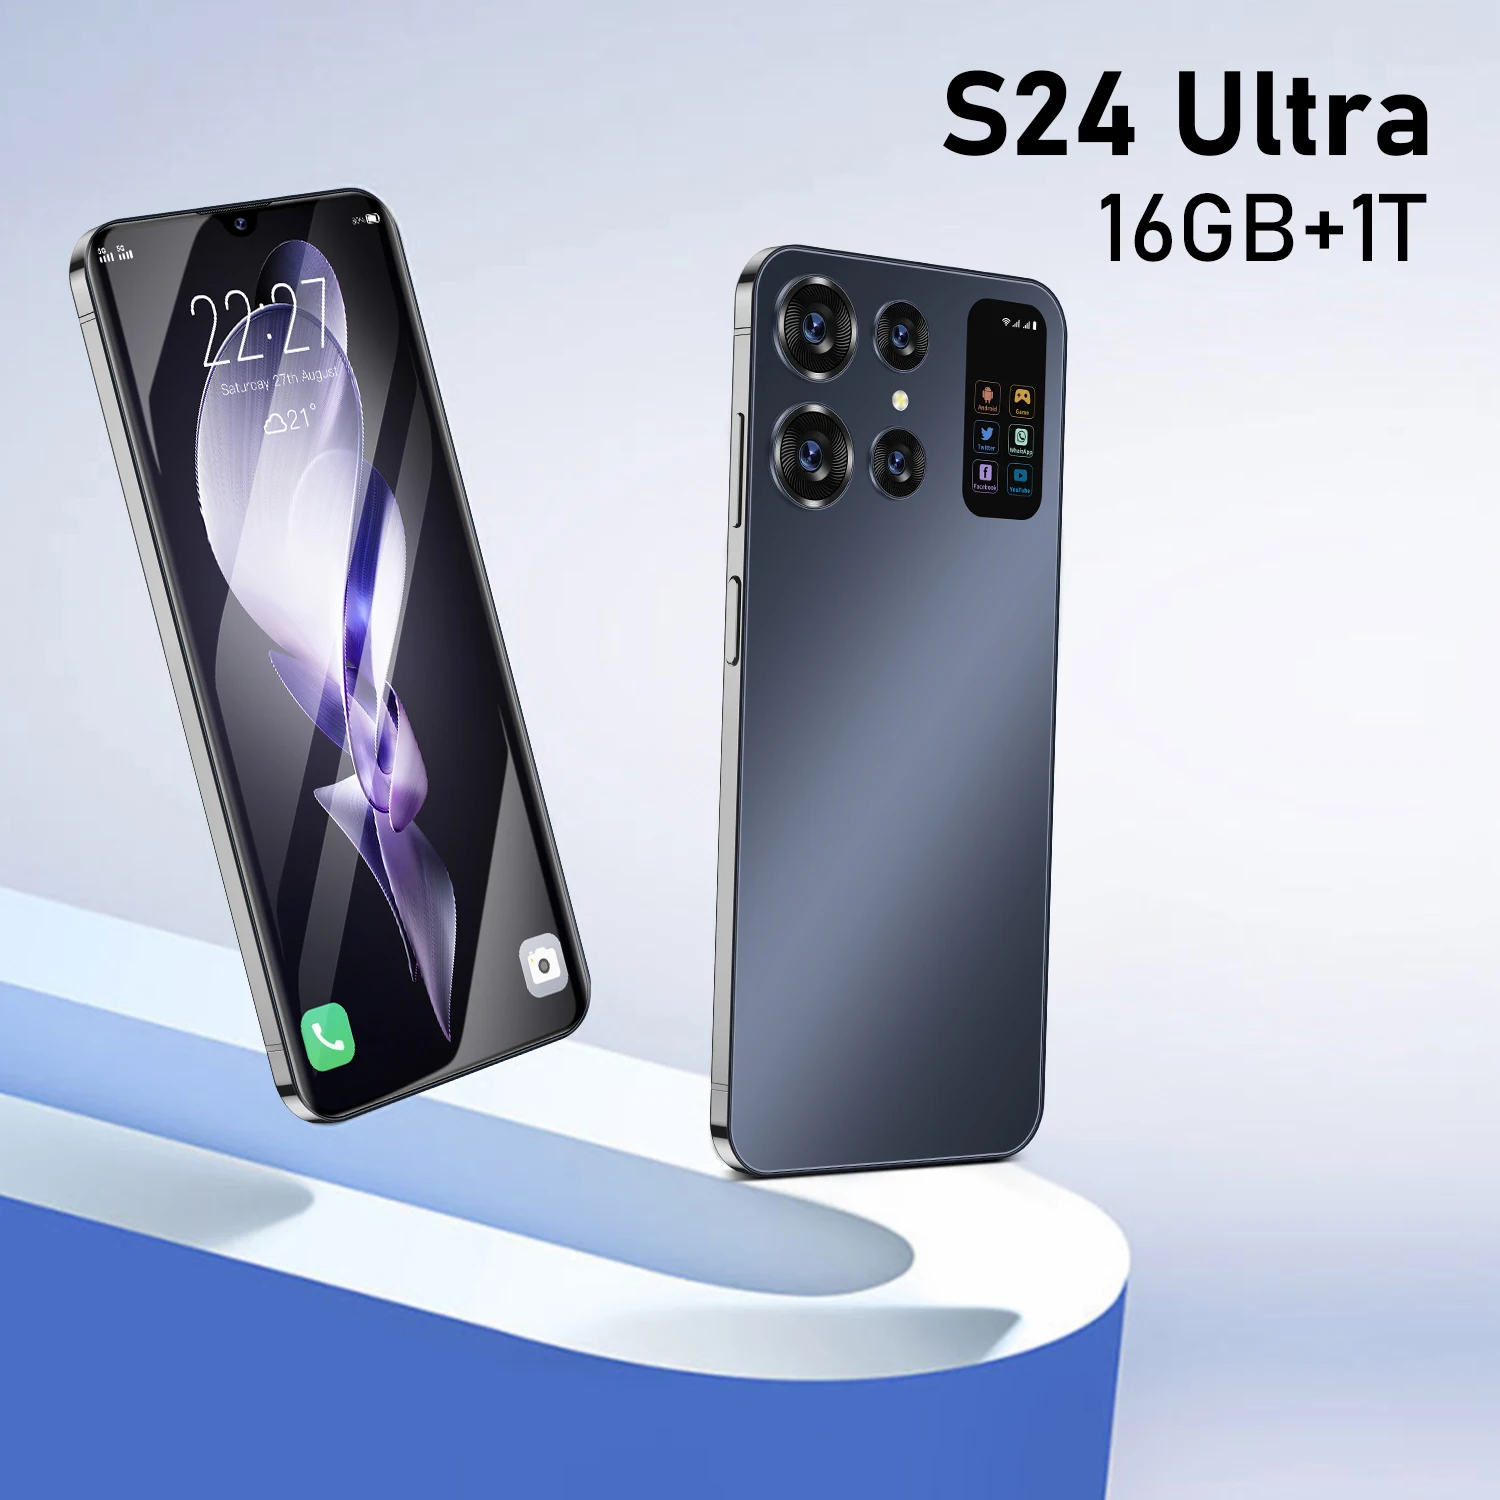 S24 Ultra 5g smartphone, 12GB/16GB+512GB/1TB, GPS, 5G, Dual SIM, suitable for gaming and office, global version of the phone